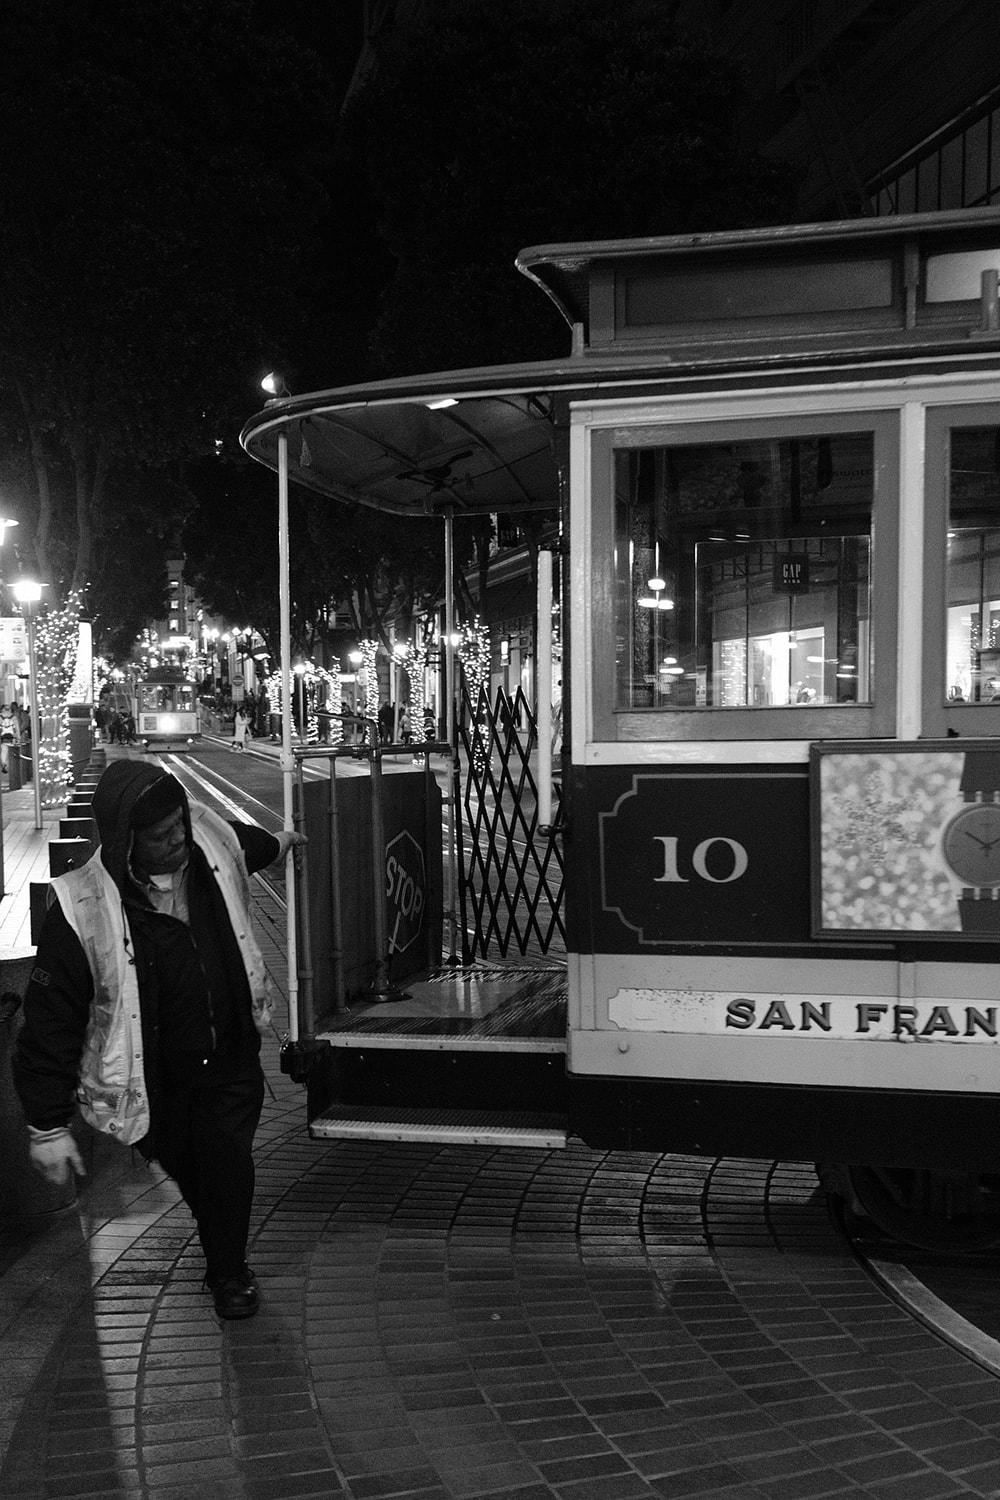 Black and white portrait photo of cable car conductor pulling a cable car on one of the mechanical turntables at the end of the line.